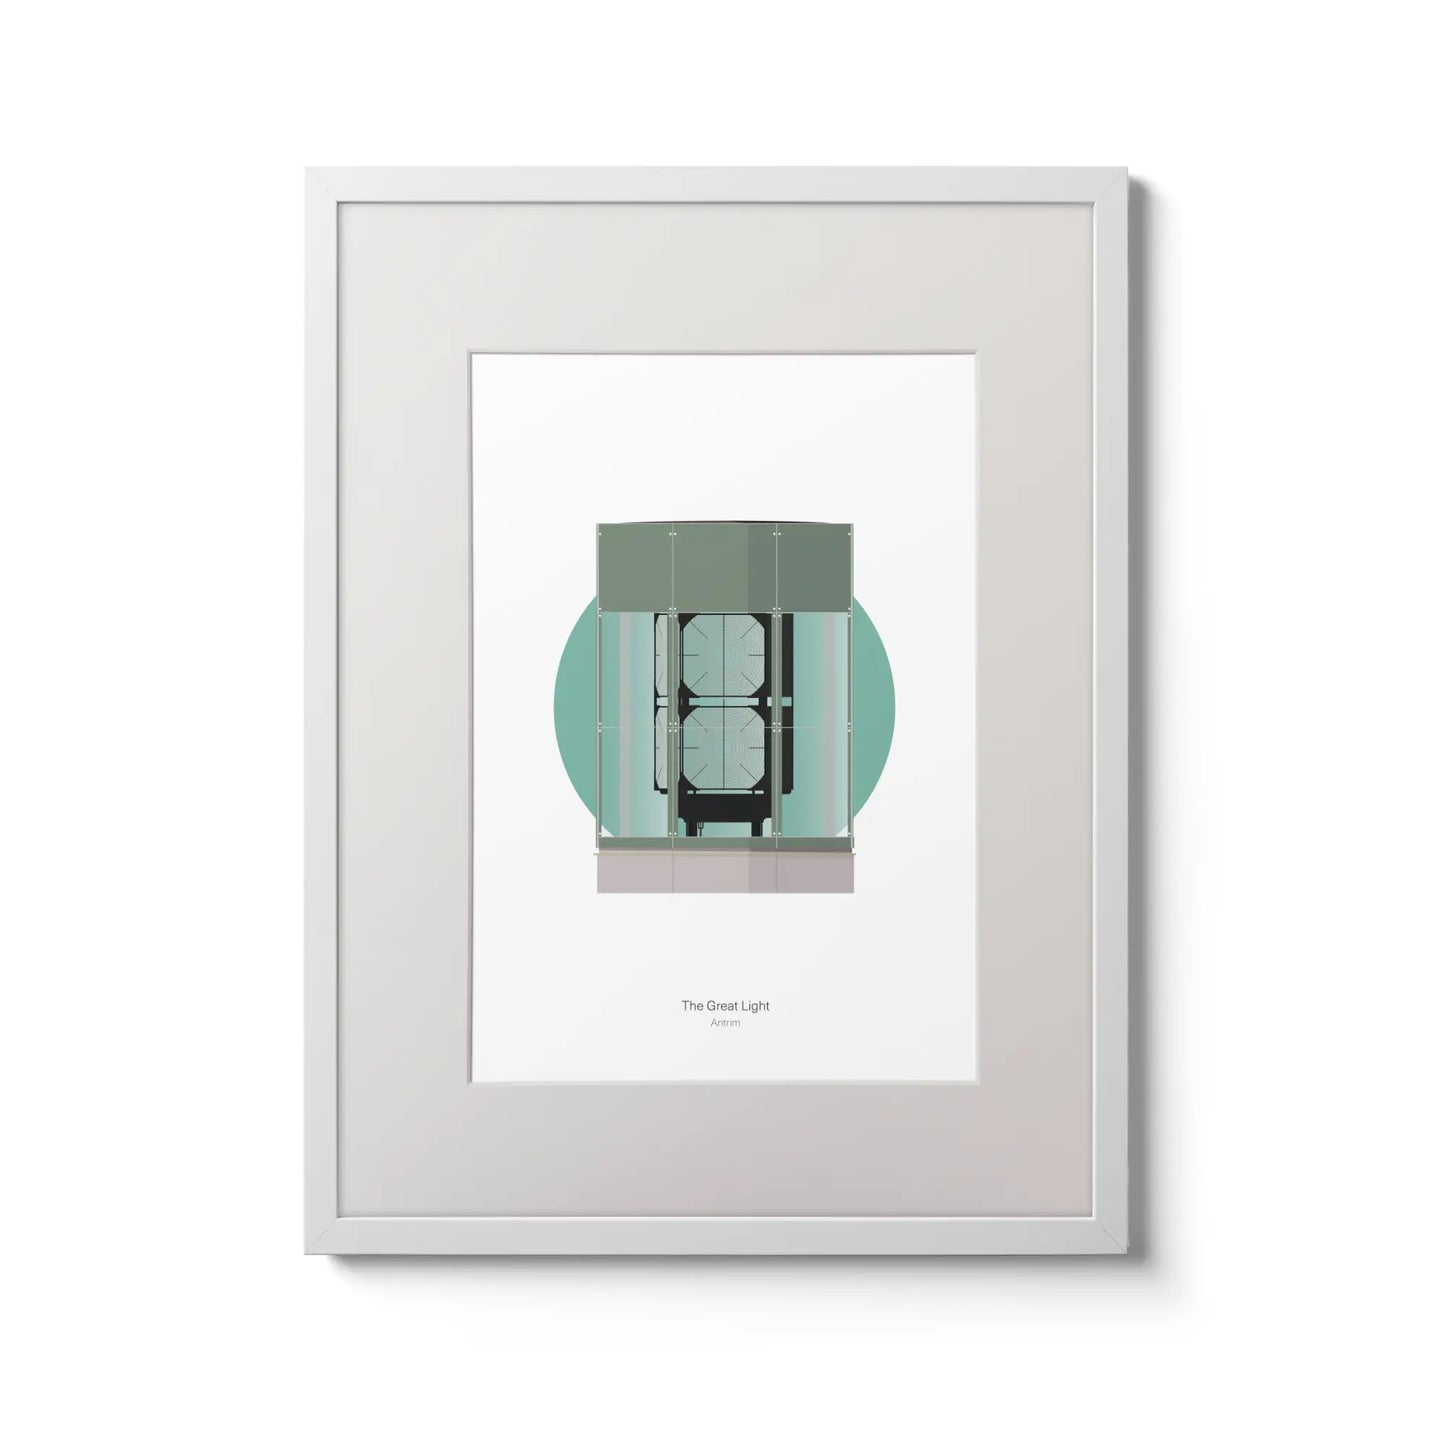 Contemporary wall art decor of The Great Light lighthouse on a white background inside light blue square,  in a white frame measuring 30x40cm.